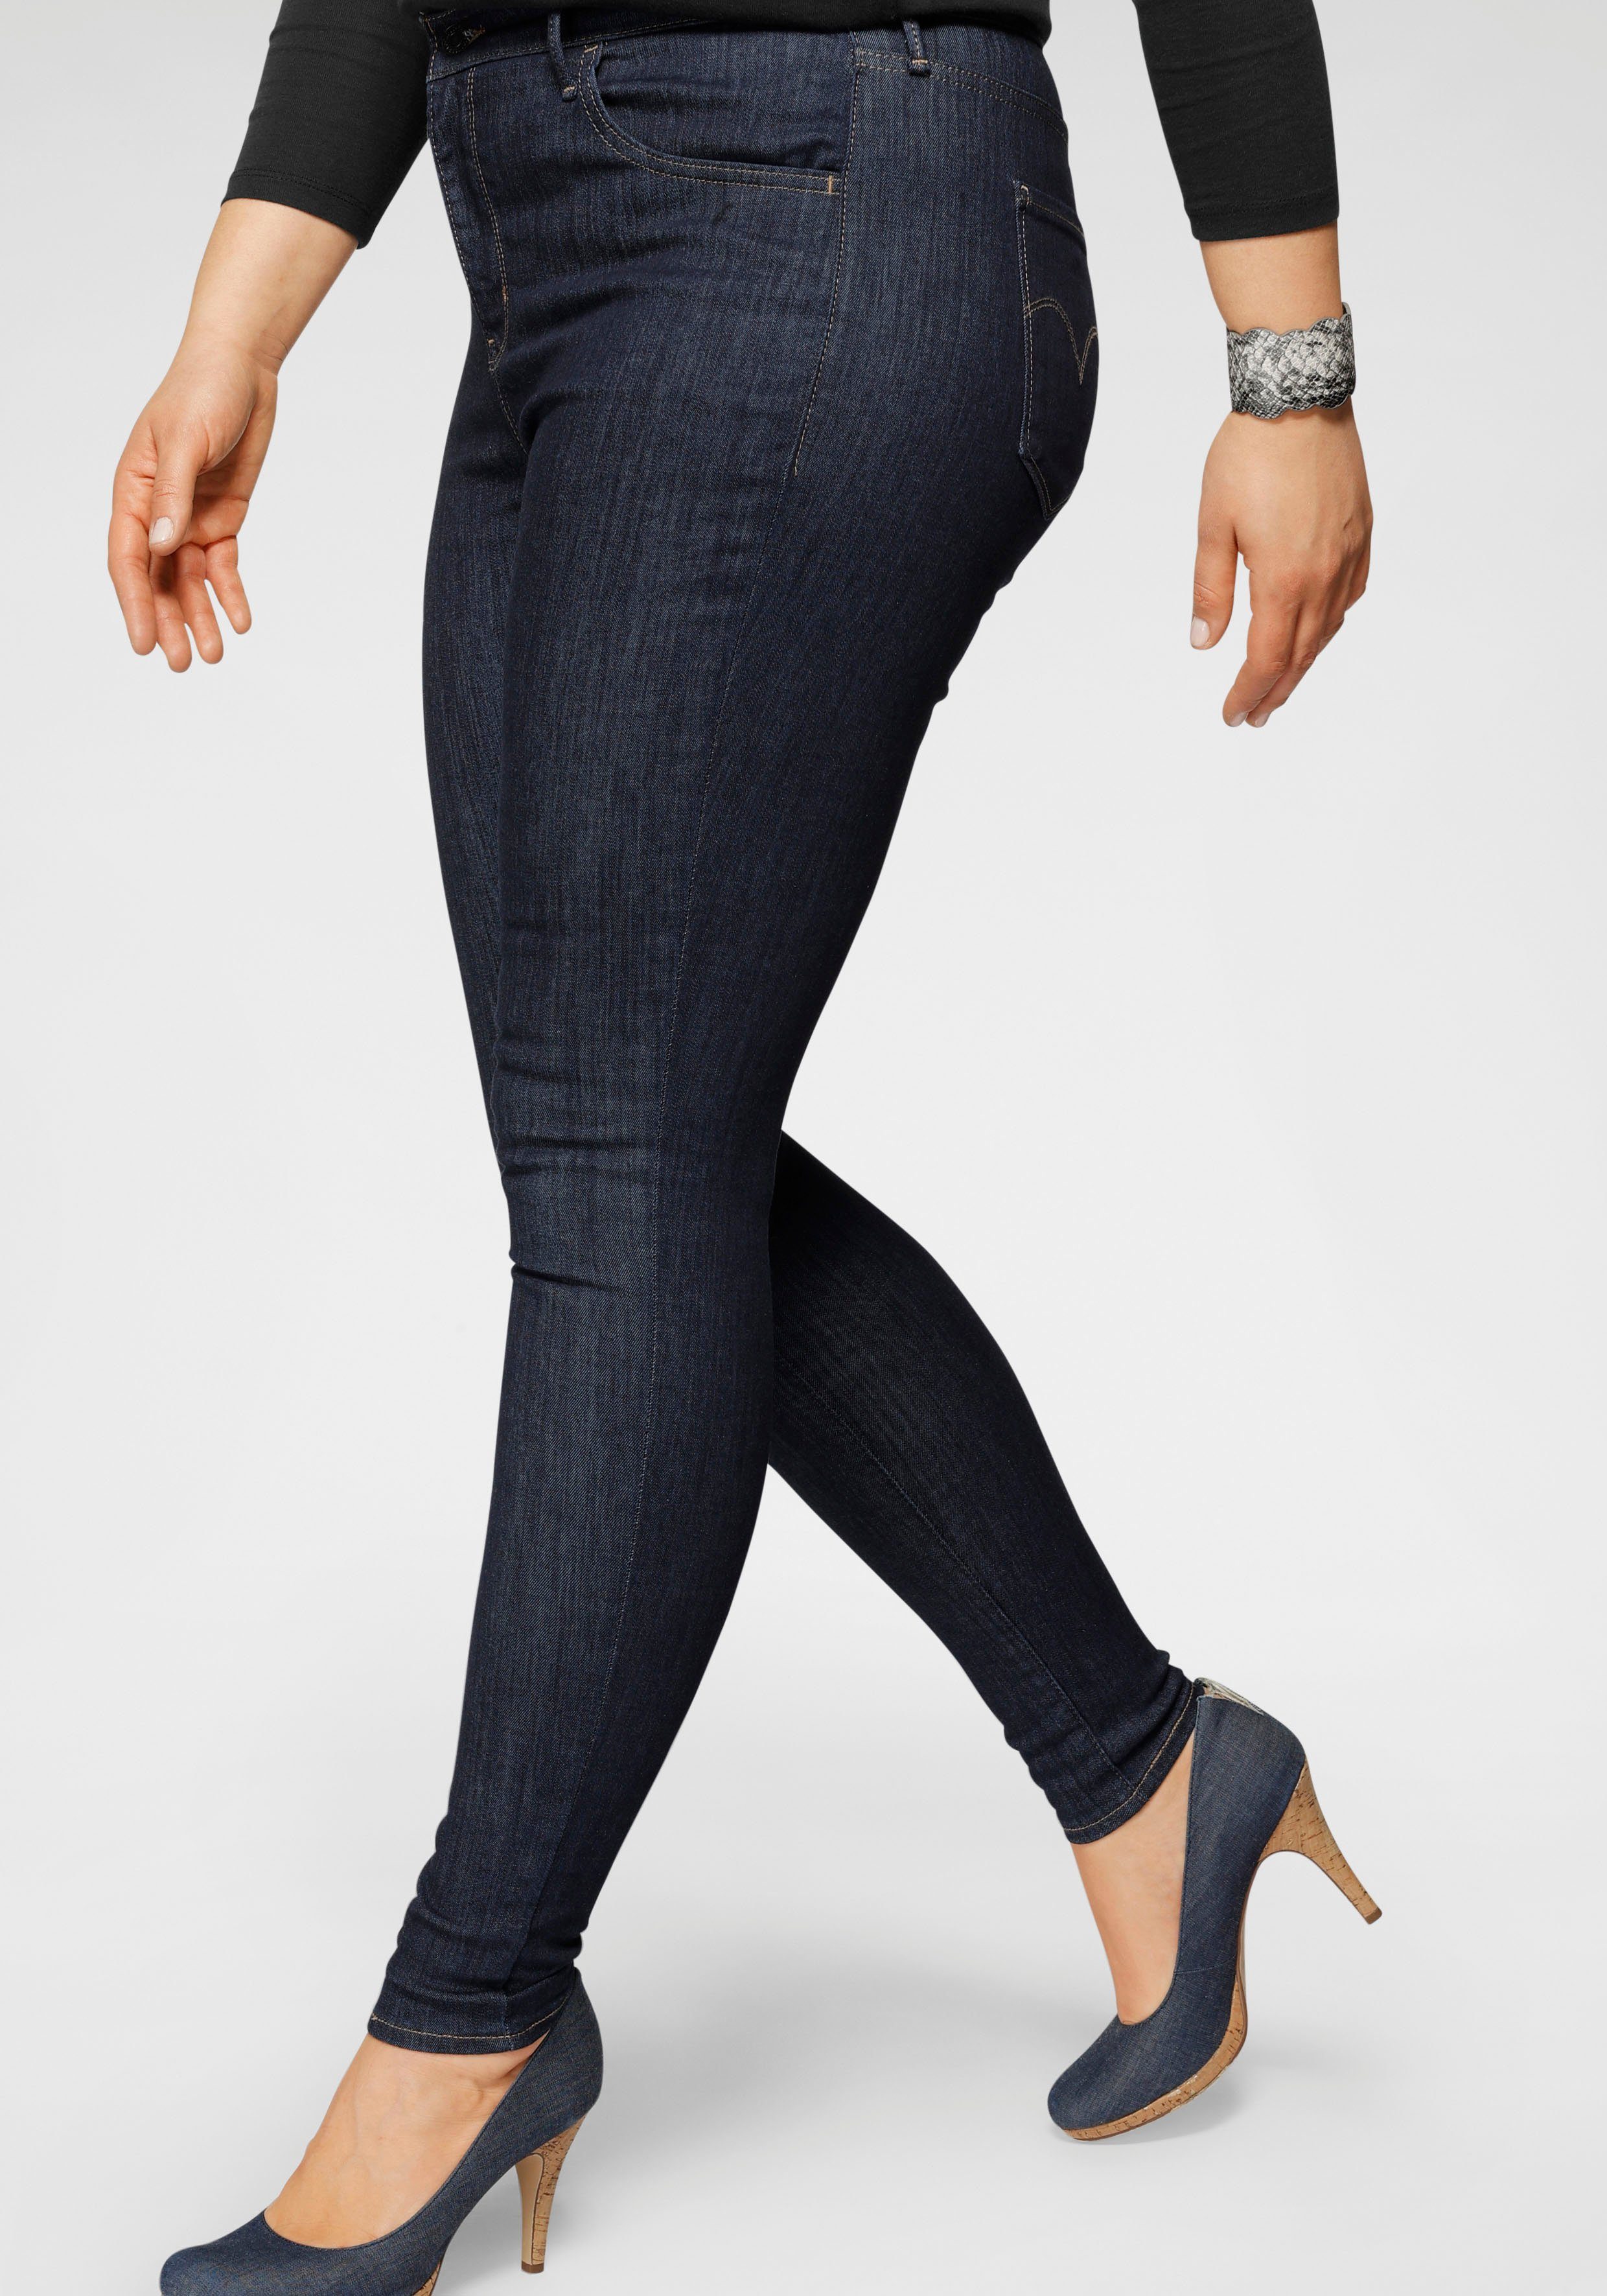 Levi's® Plus Skinny-fit-Jeans 720 High-Rise mit hoher Leibhöhe rinsed